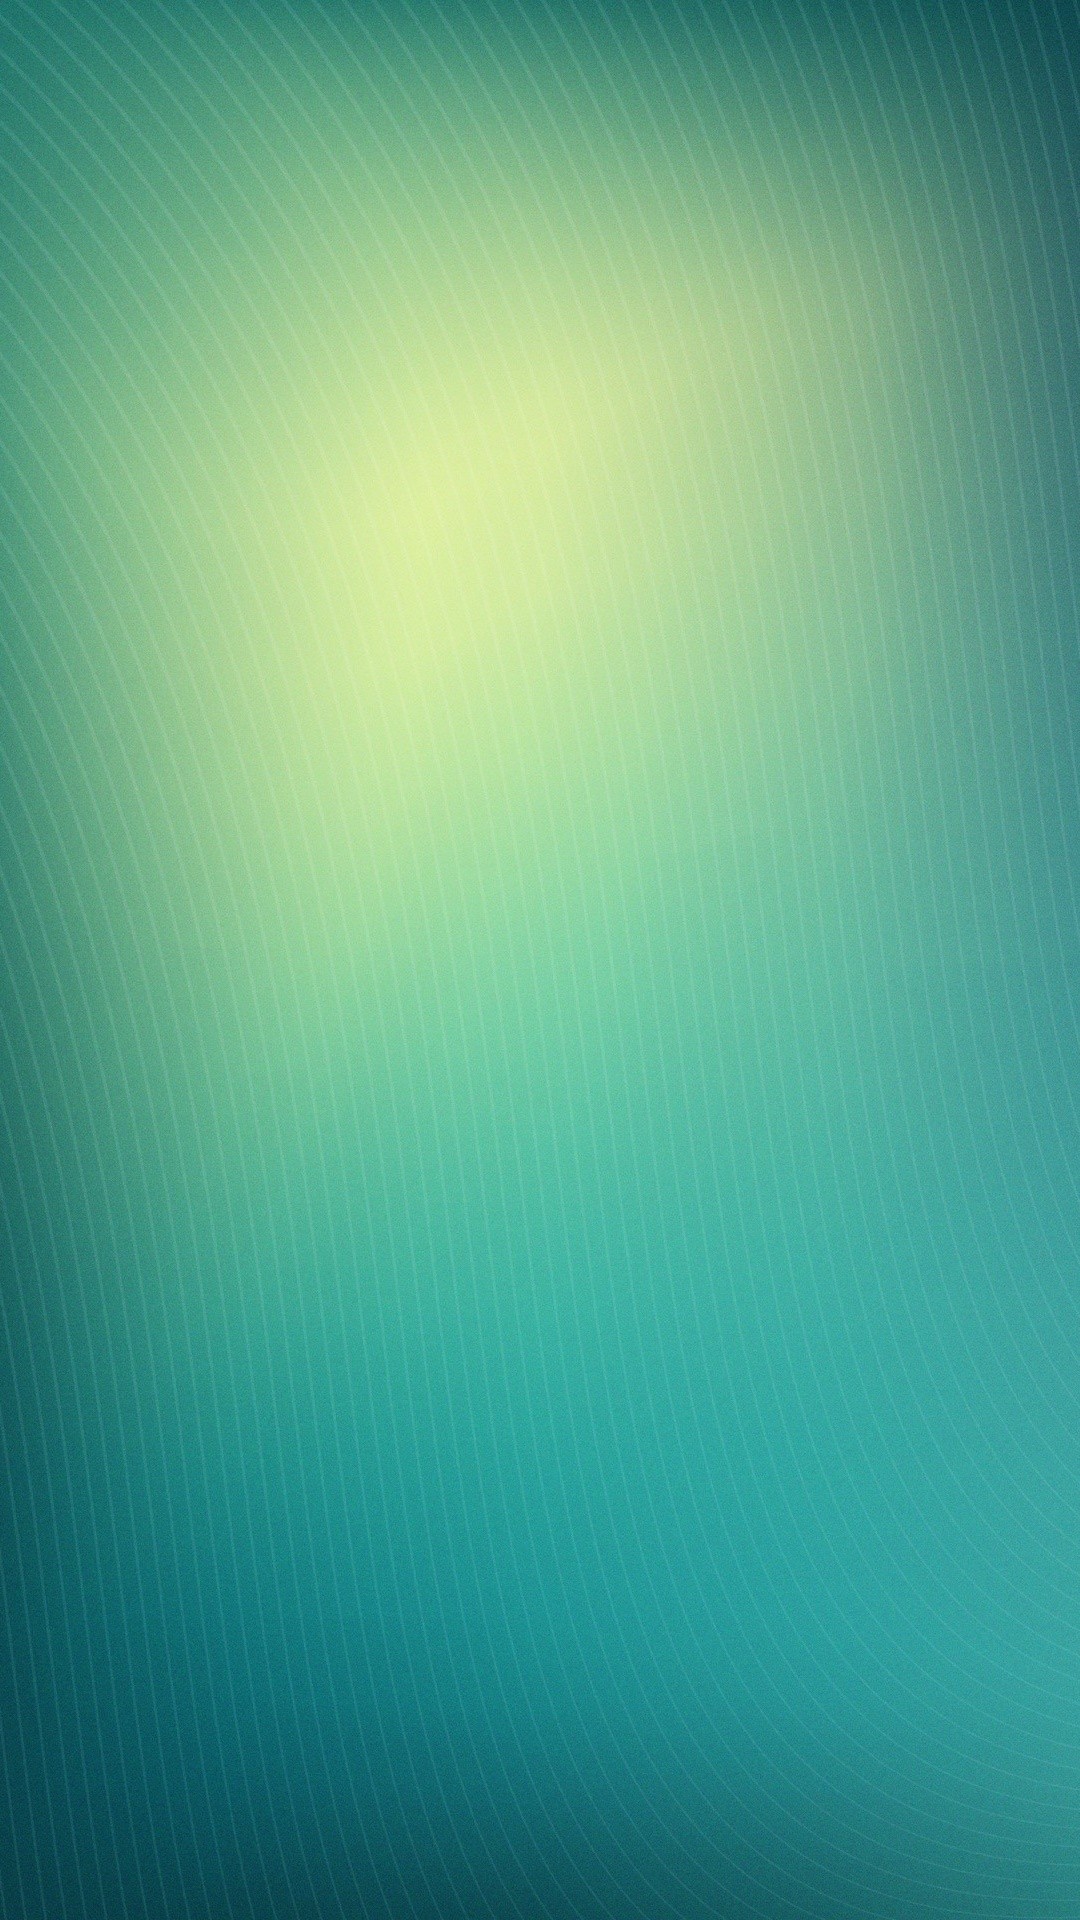 1080x1920 Wallpaper backgrounds Â· Green gradient. 18 Calming blurred lights and  gradients wallpapers for iPhone - @mobile9